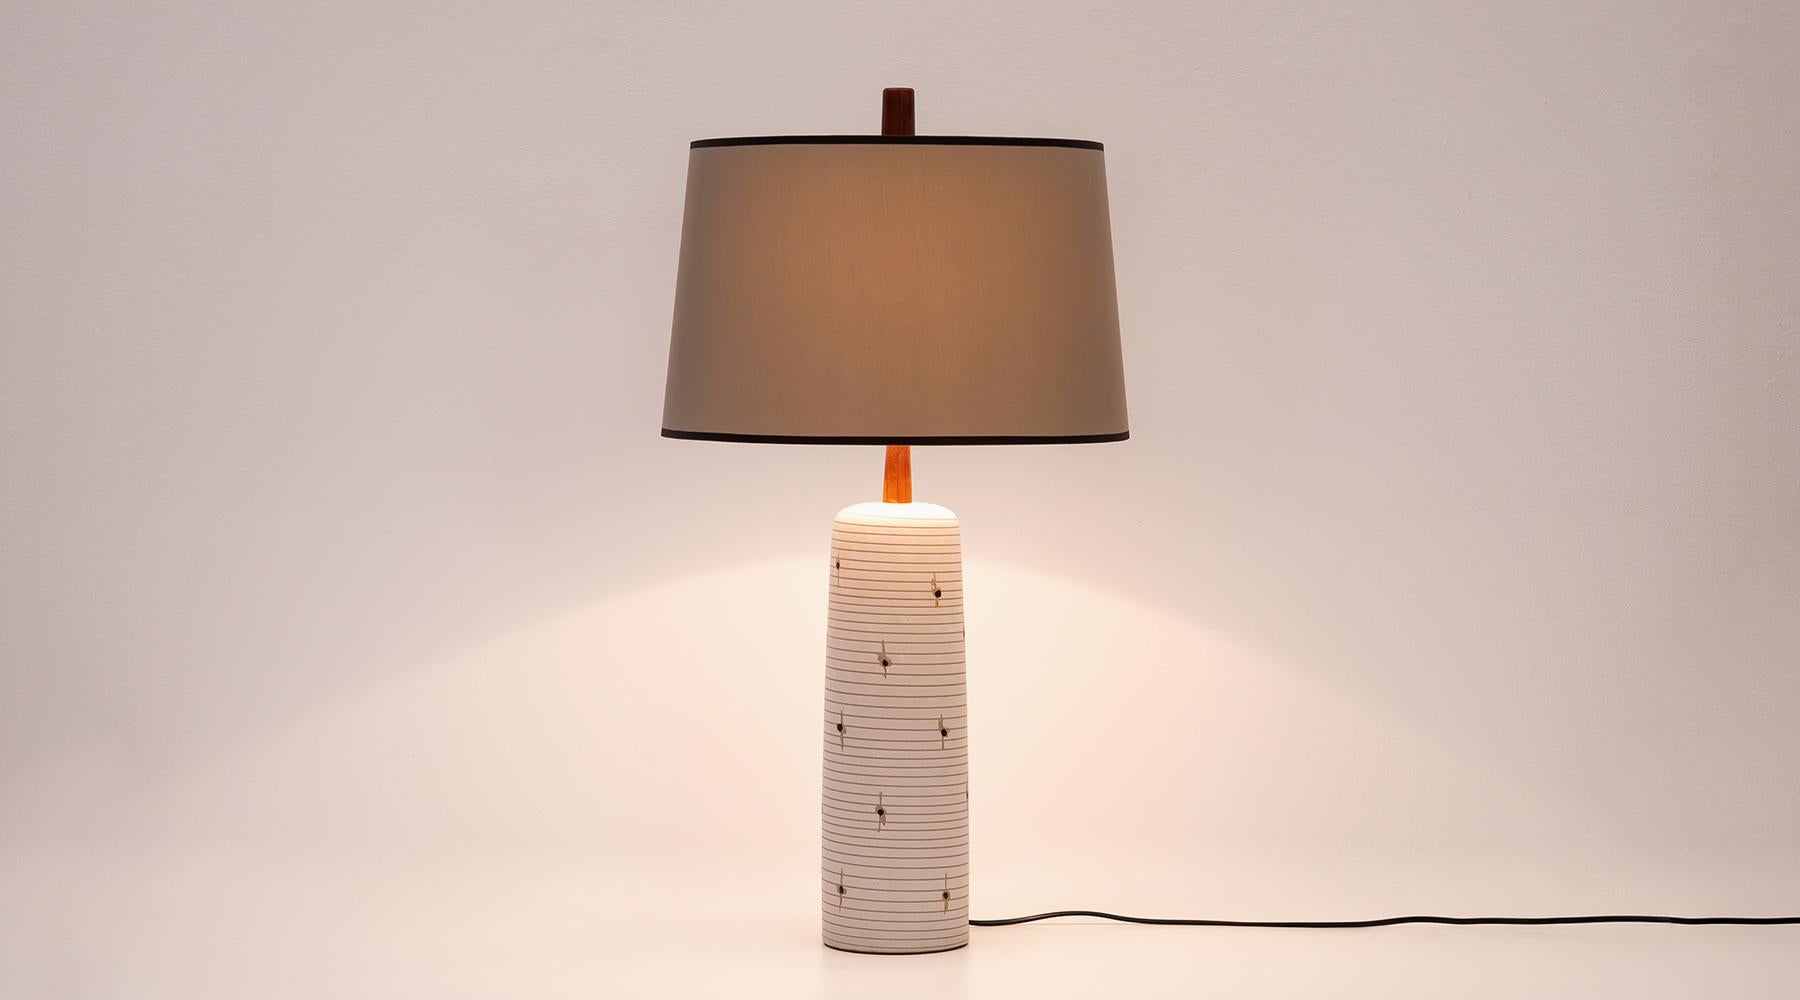 Table lamp, beige ceramic, light shadow, Jane and Gordon Martz, USA, 1954

Stunningly simple, attractive ceramic table lamp by the designers Jane & Gordon Martz. The lamp is in excellent condition. The ceramic comes in sand colour and is extensively